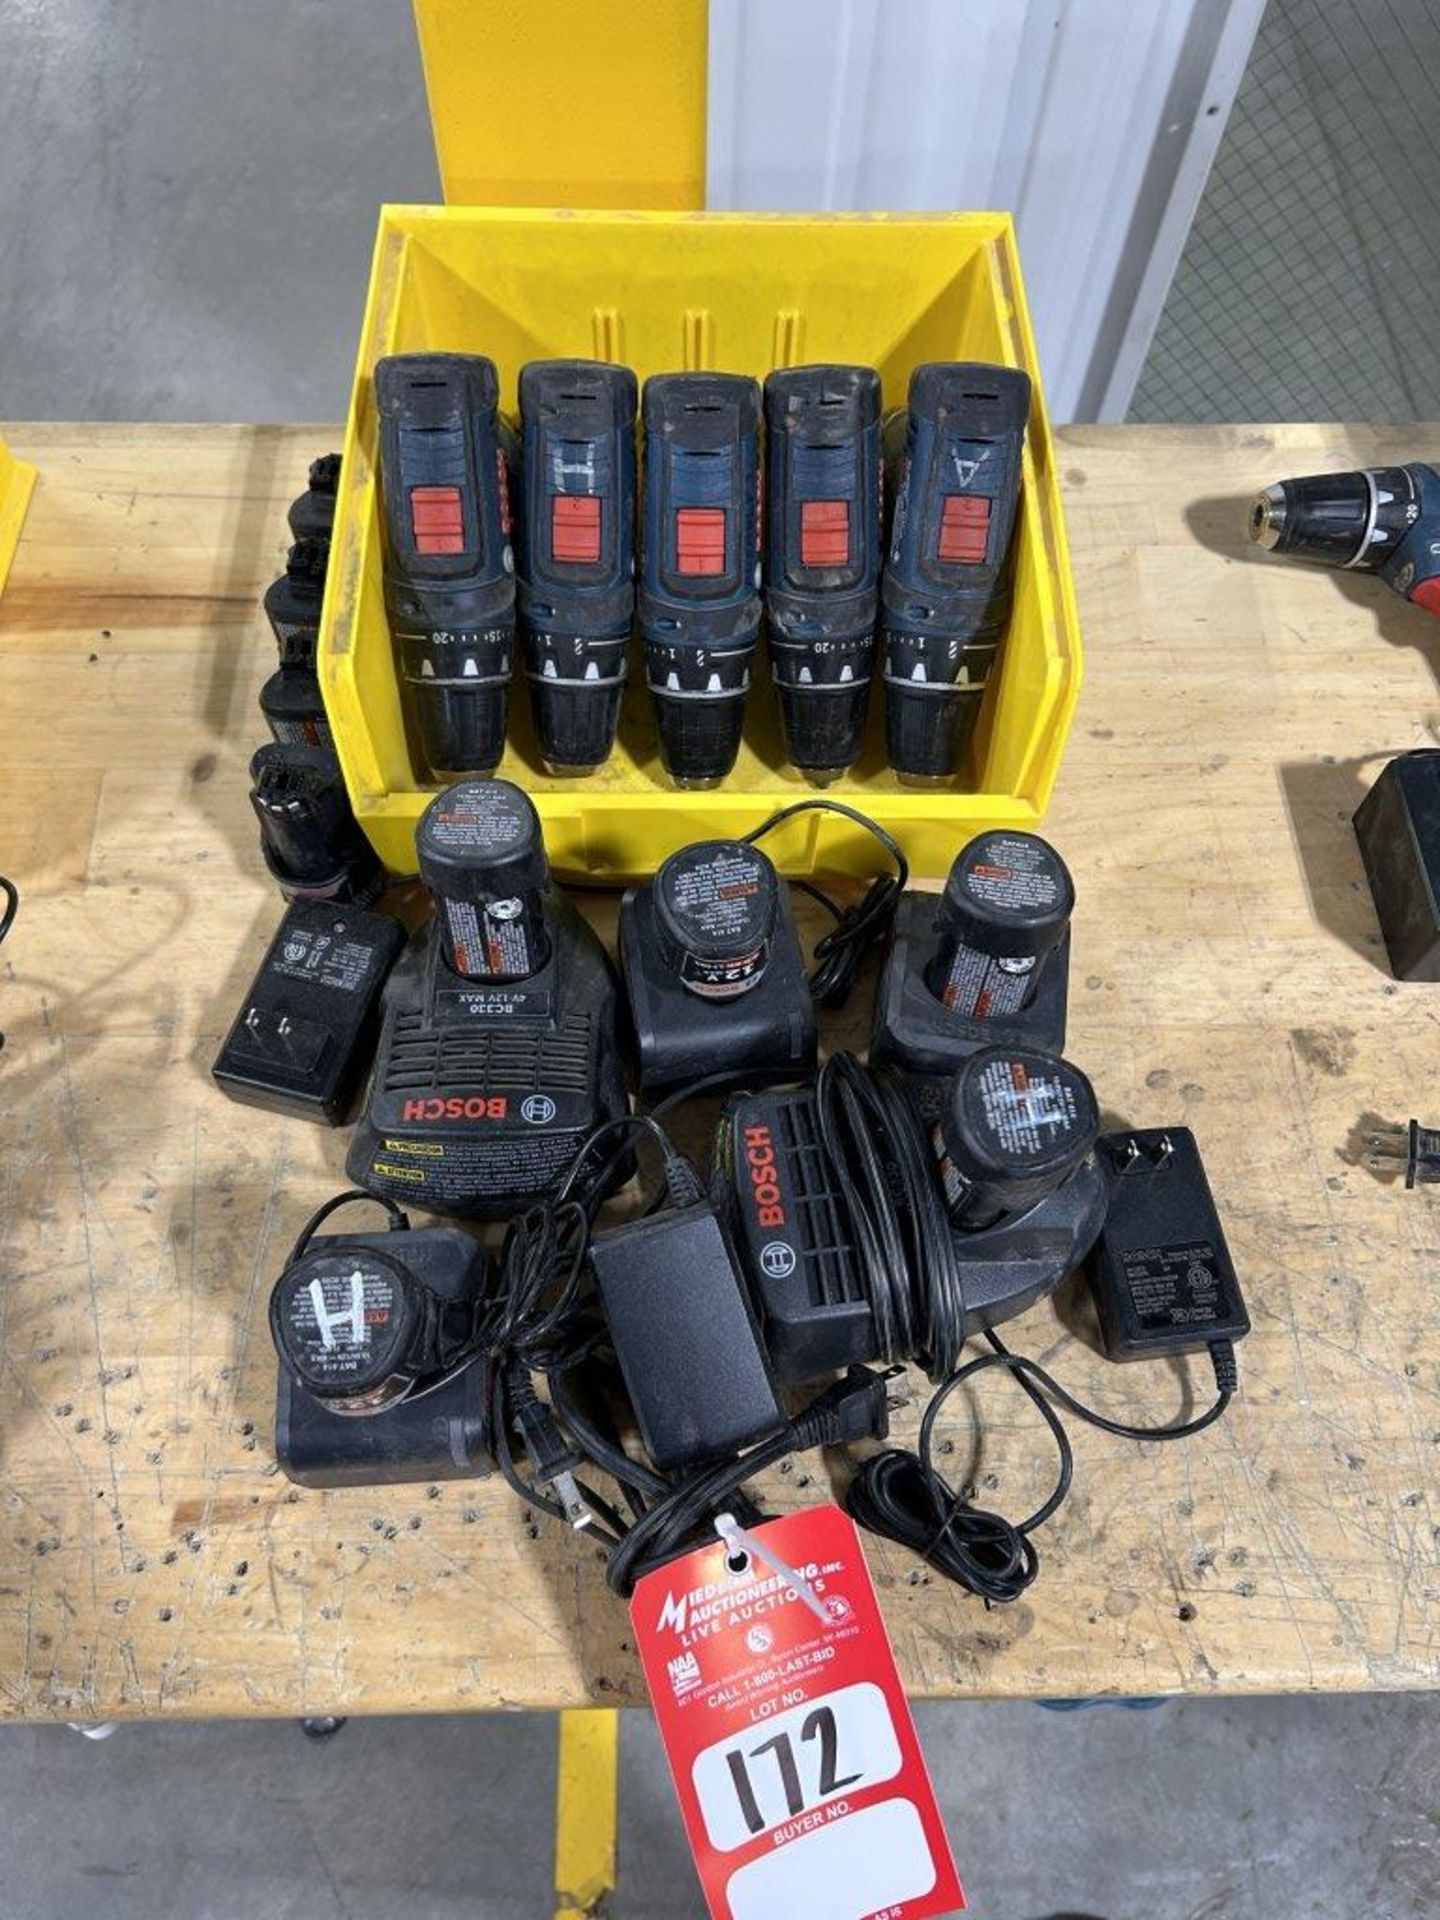 (5) BOSCH LITHIUM ION 12V MAX CORDLESS DRILLS, (14) BATTERIES, AND (6) CHARGERS